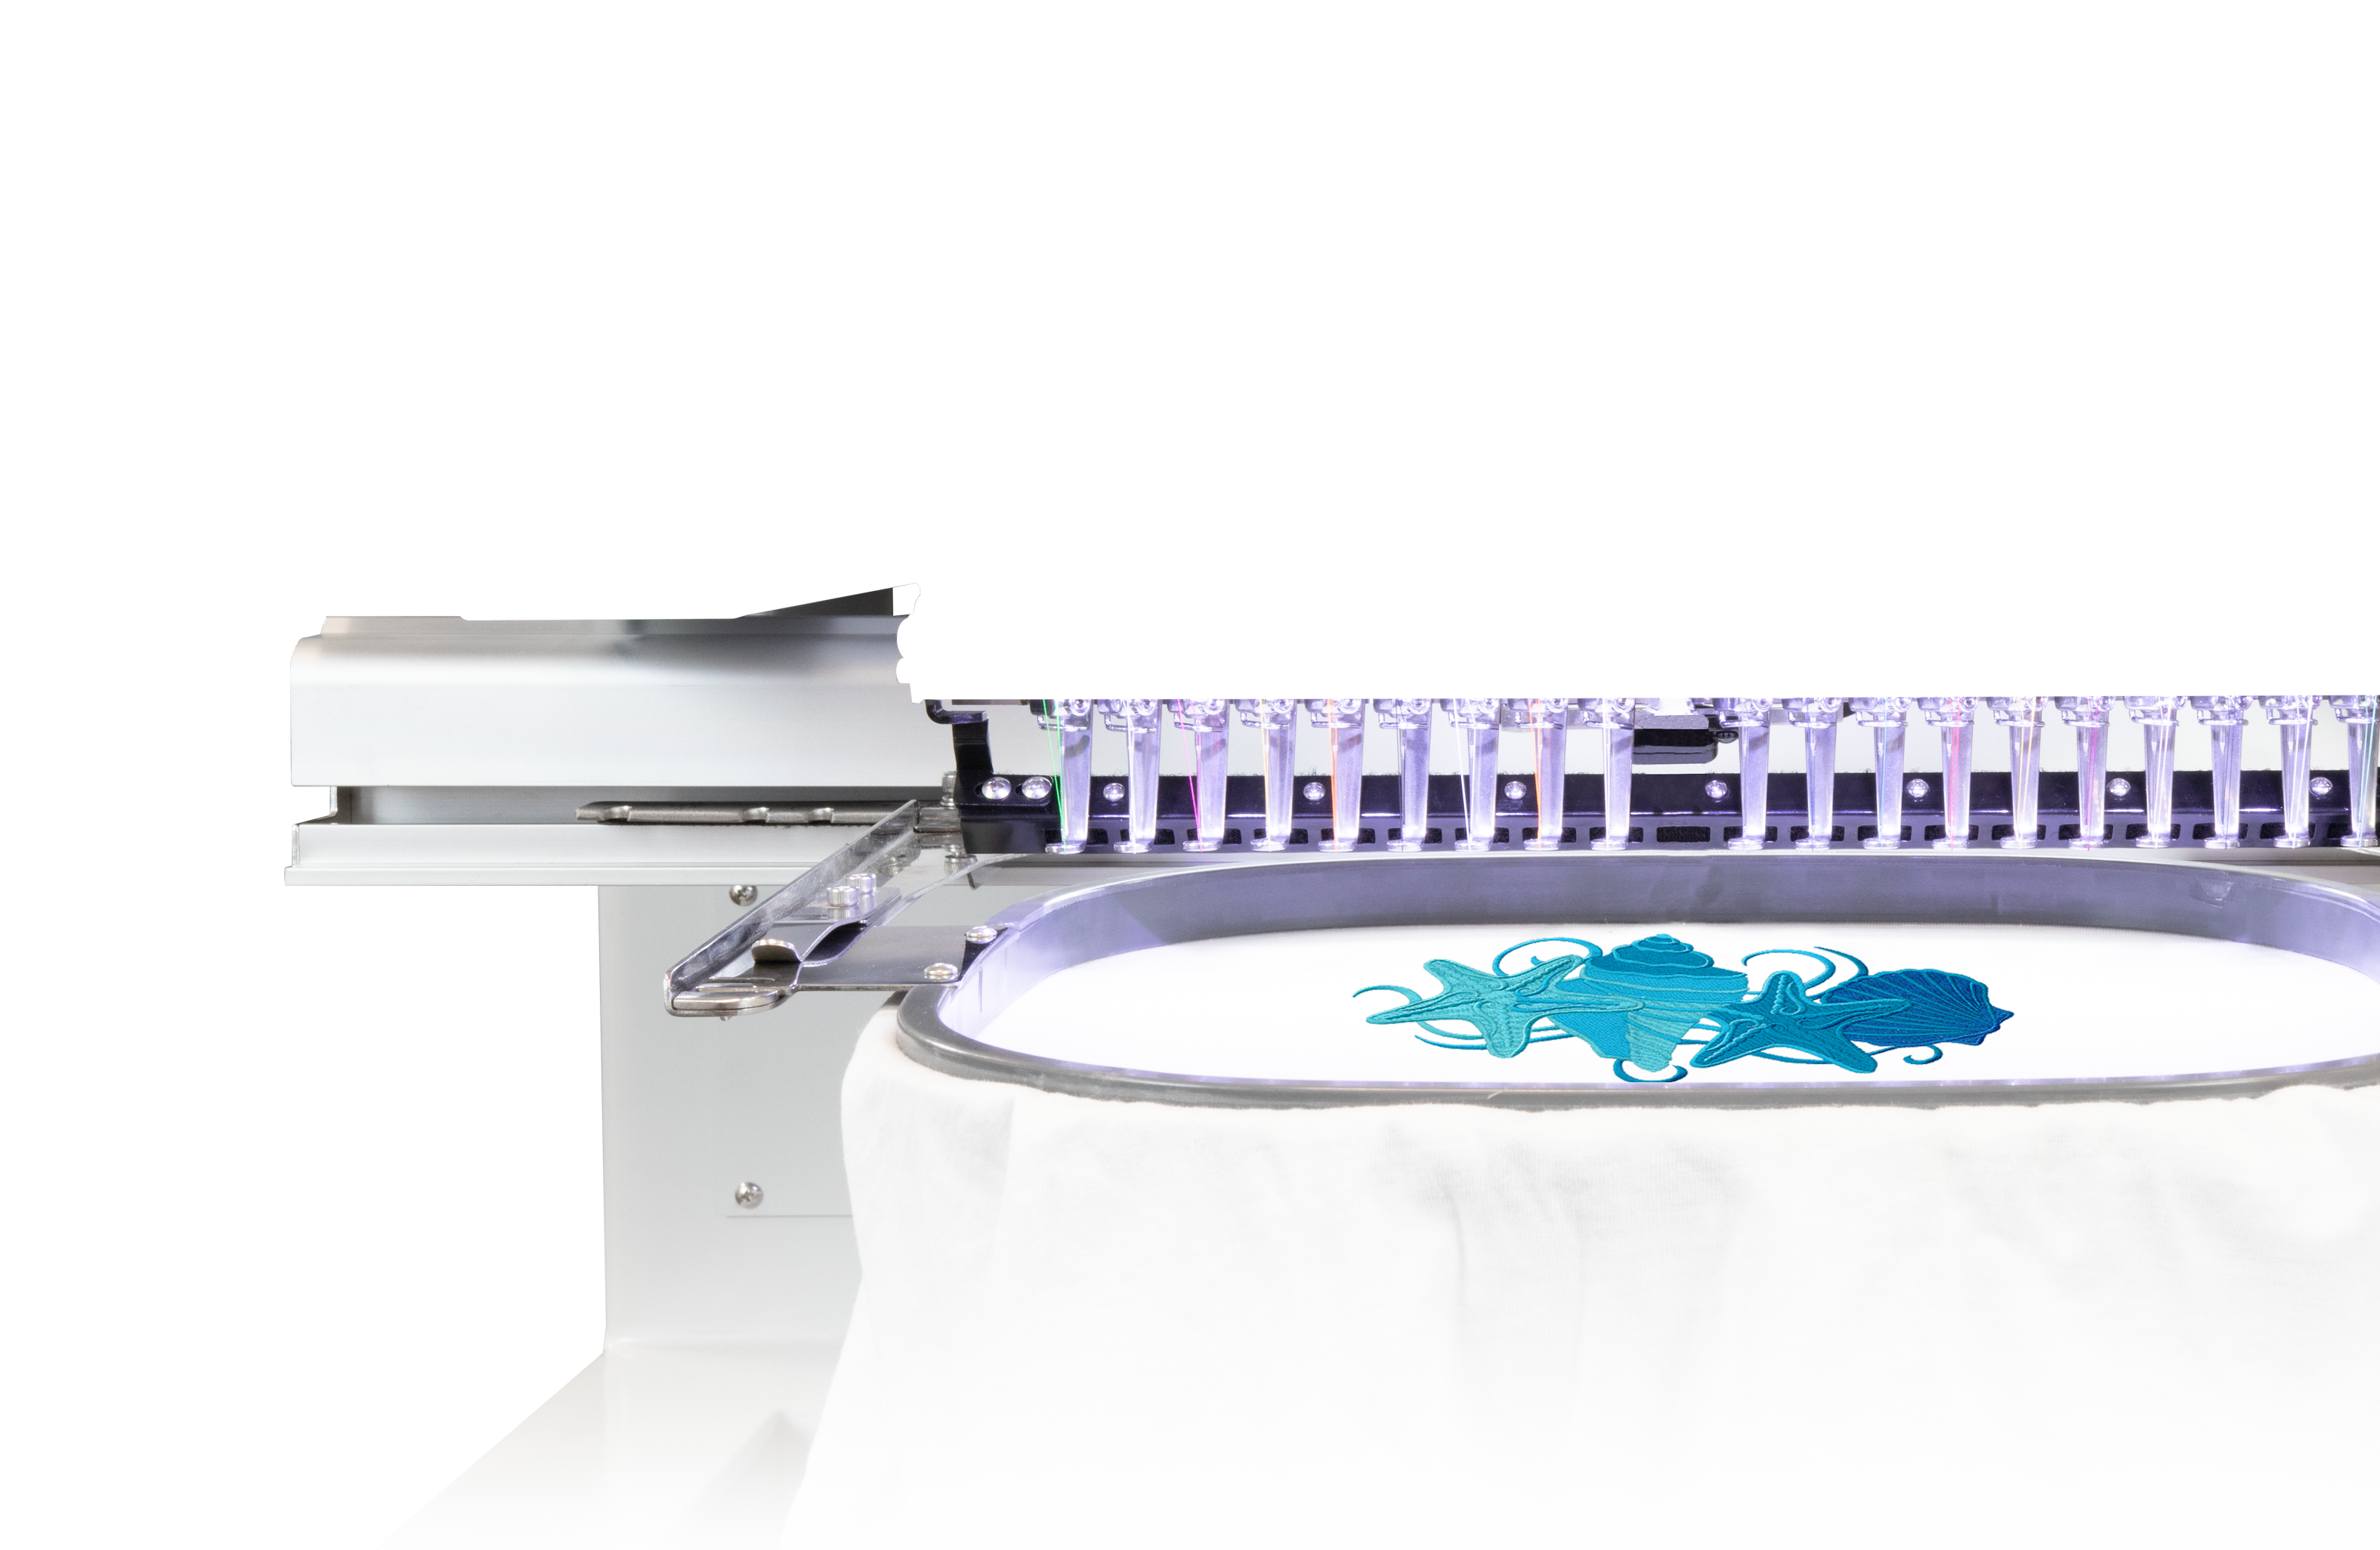 Ricoma MT1503-8S Three Head Commercial Embroidery Machine